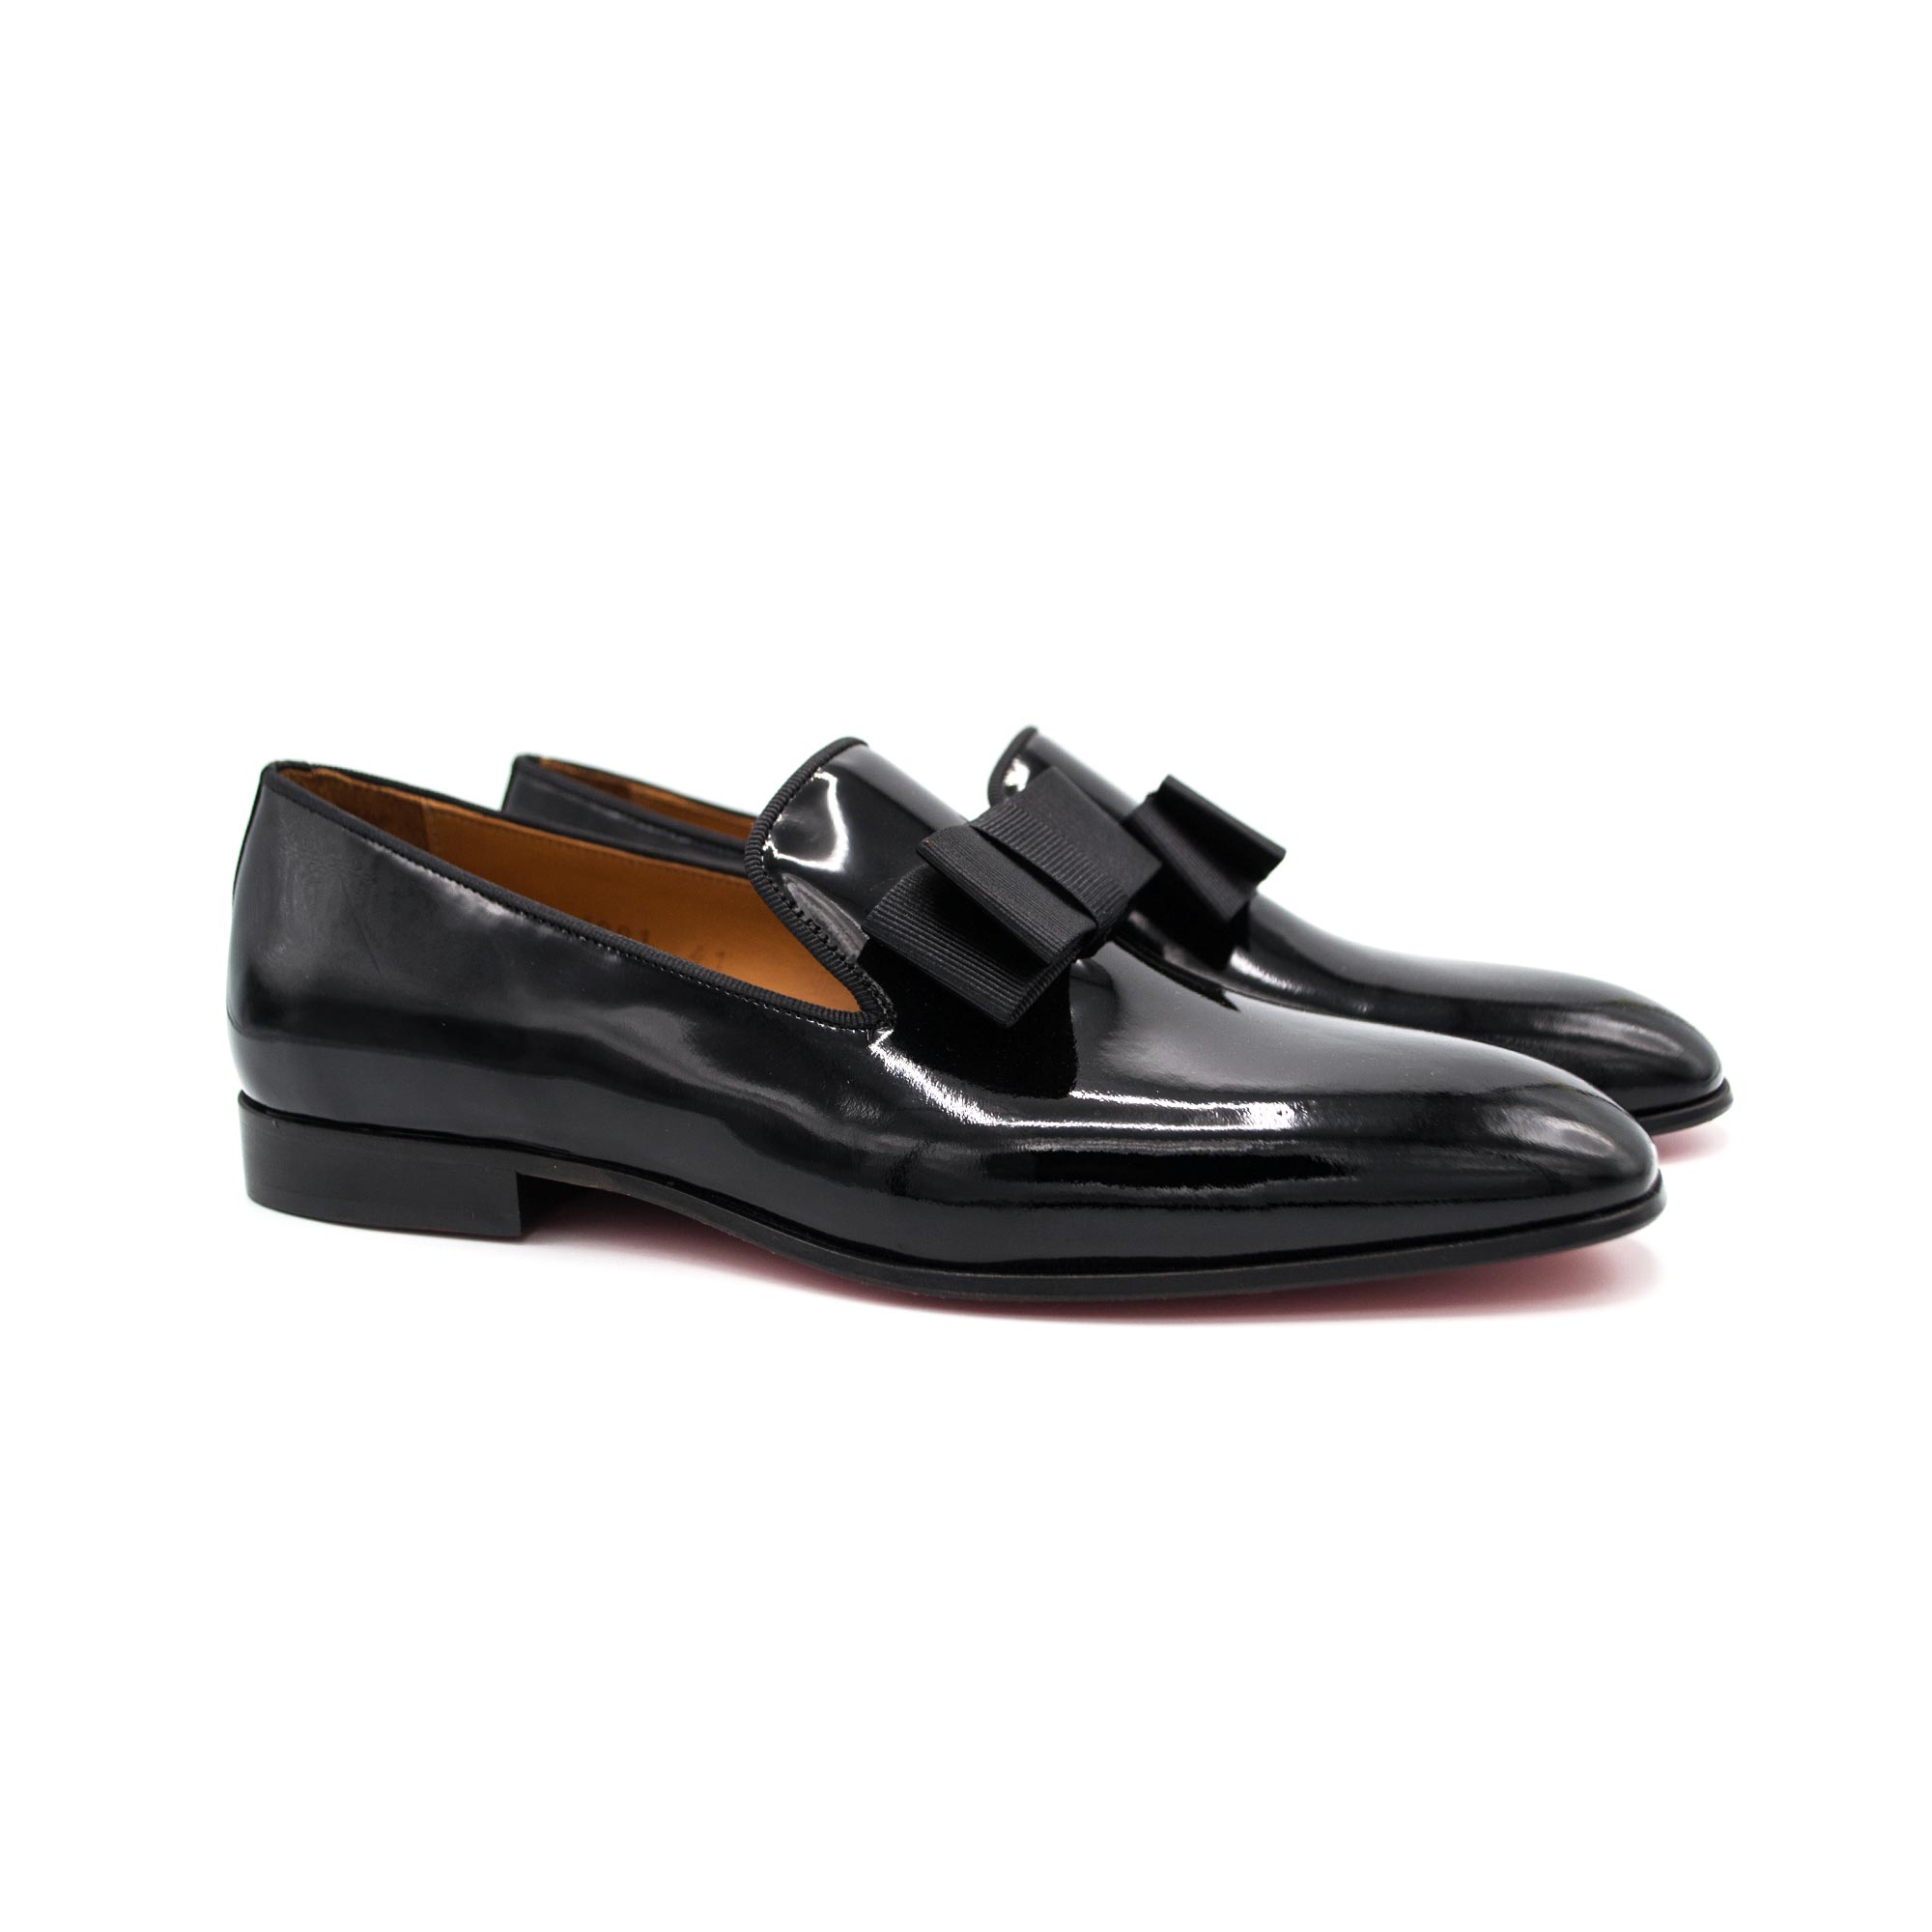 Black Patent Leather Tuxedo Shoes | Zerbay Collection